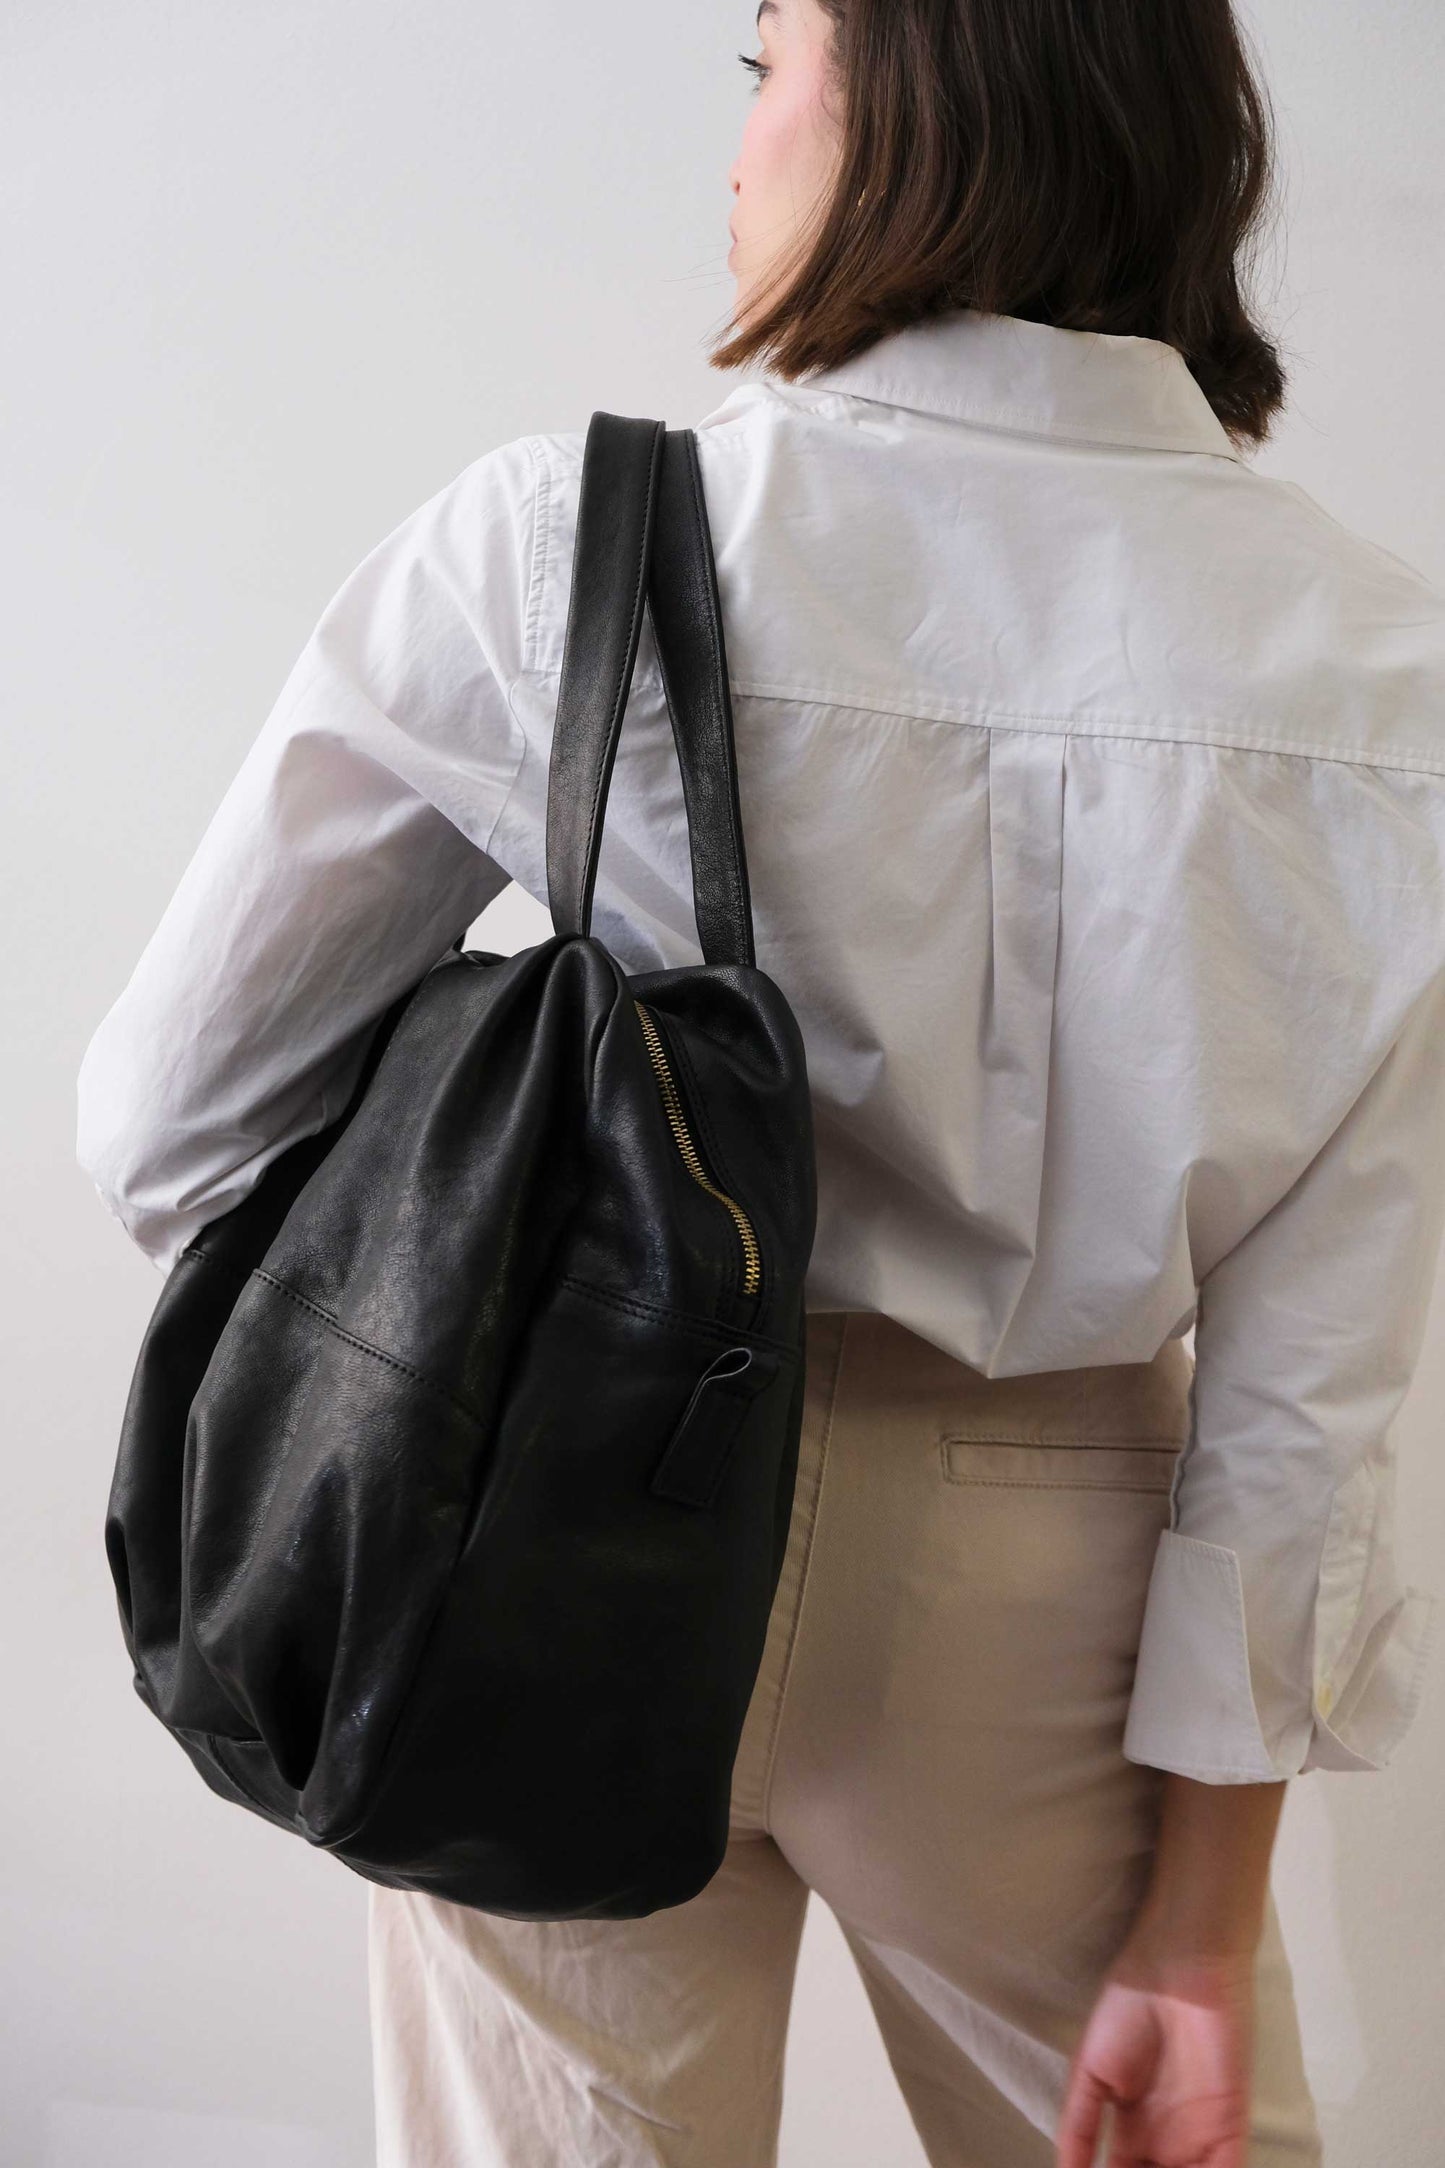 PRE ORDER - discount 15% -Riri tote bag in black nappa leather- use code PREORDER15- DELIVERY END OF MAY